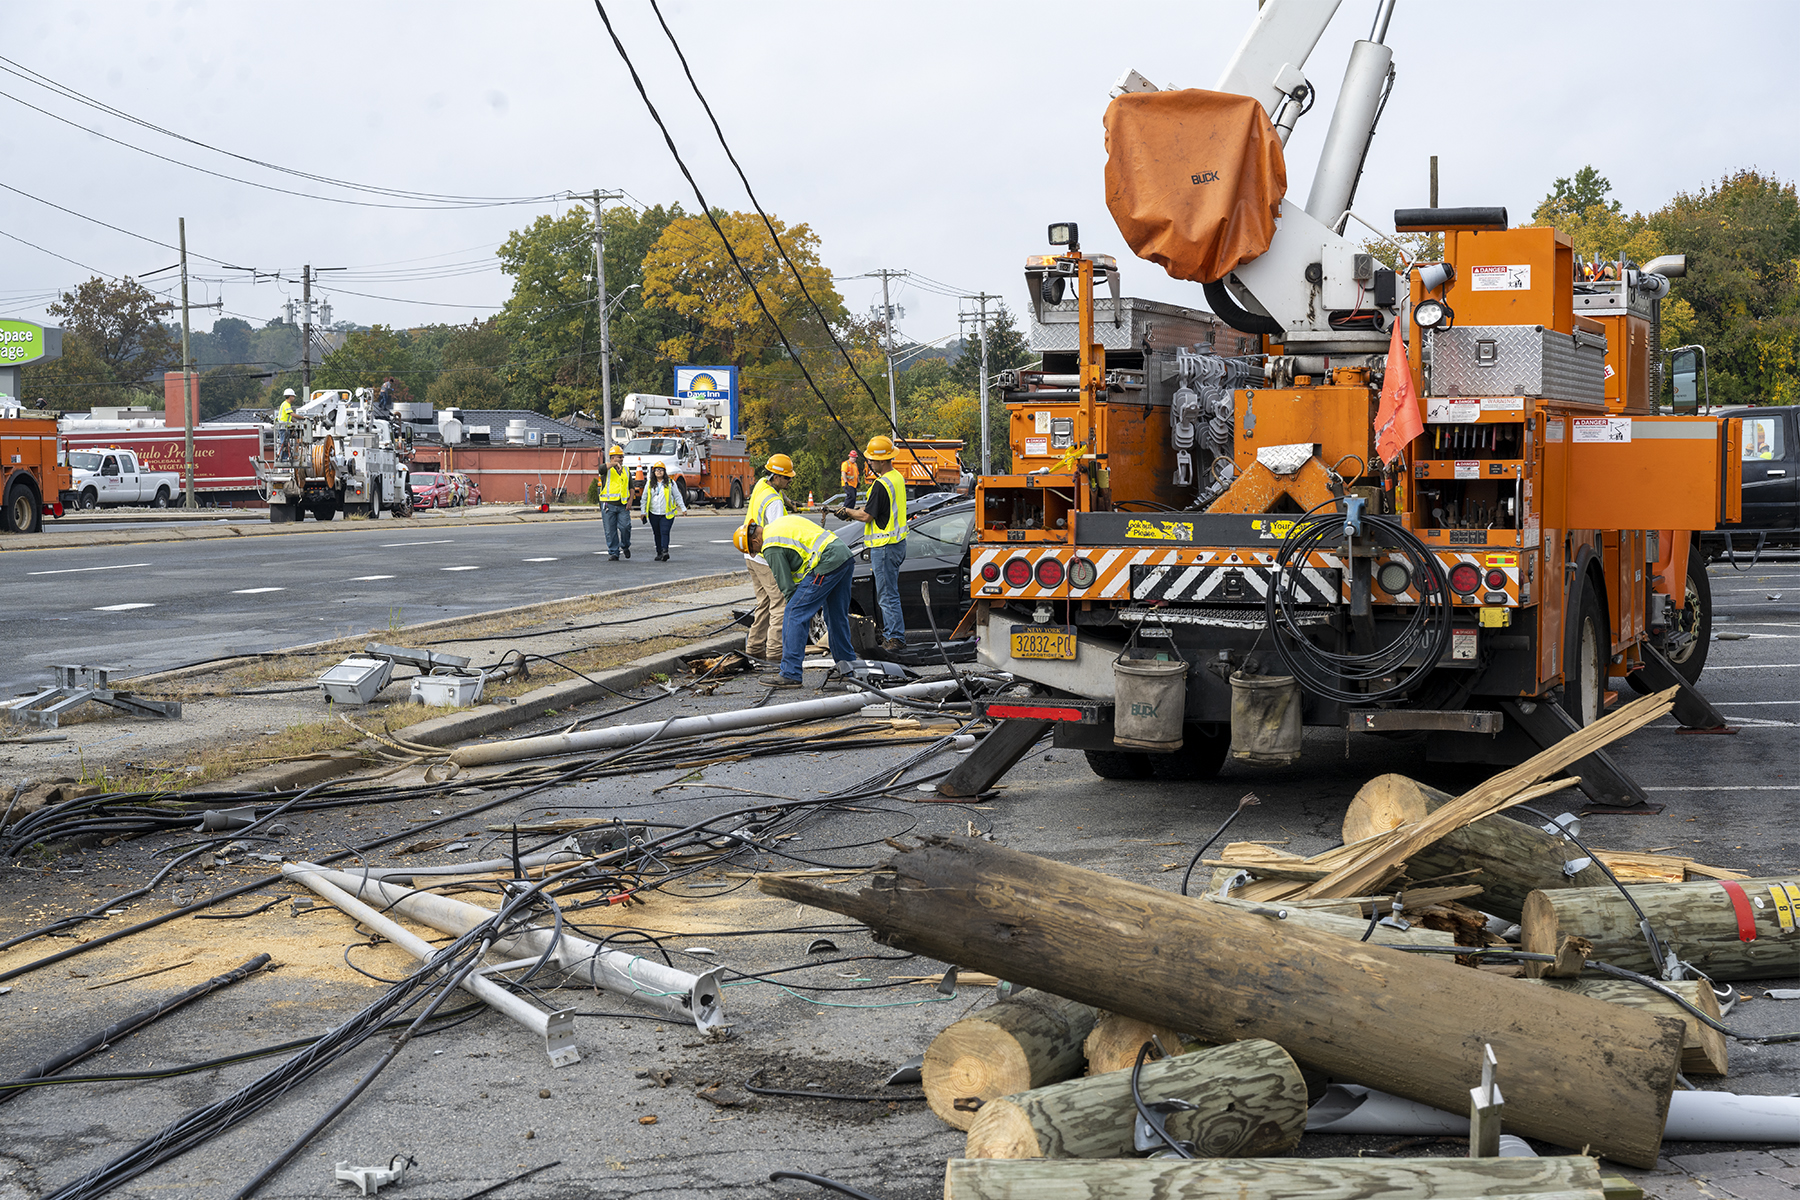 O&R crews clear broken poles from Rt. 59 accident scene in Nanuet